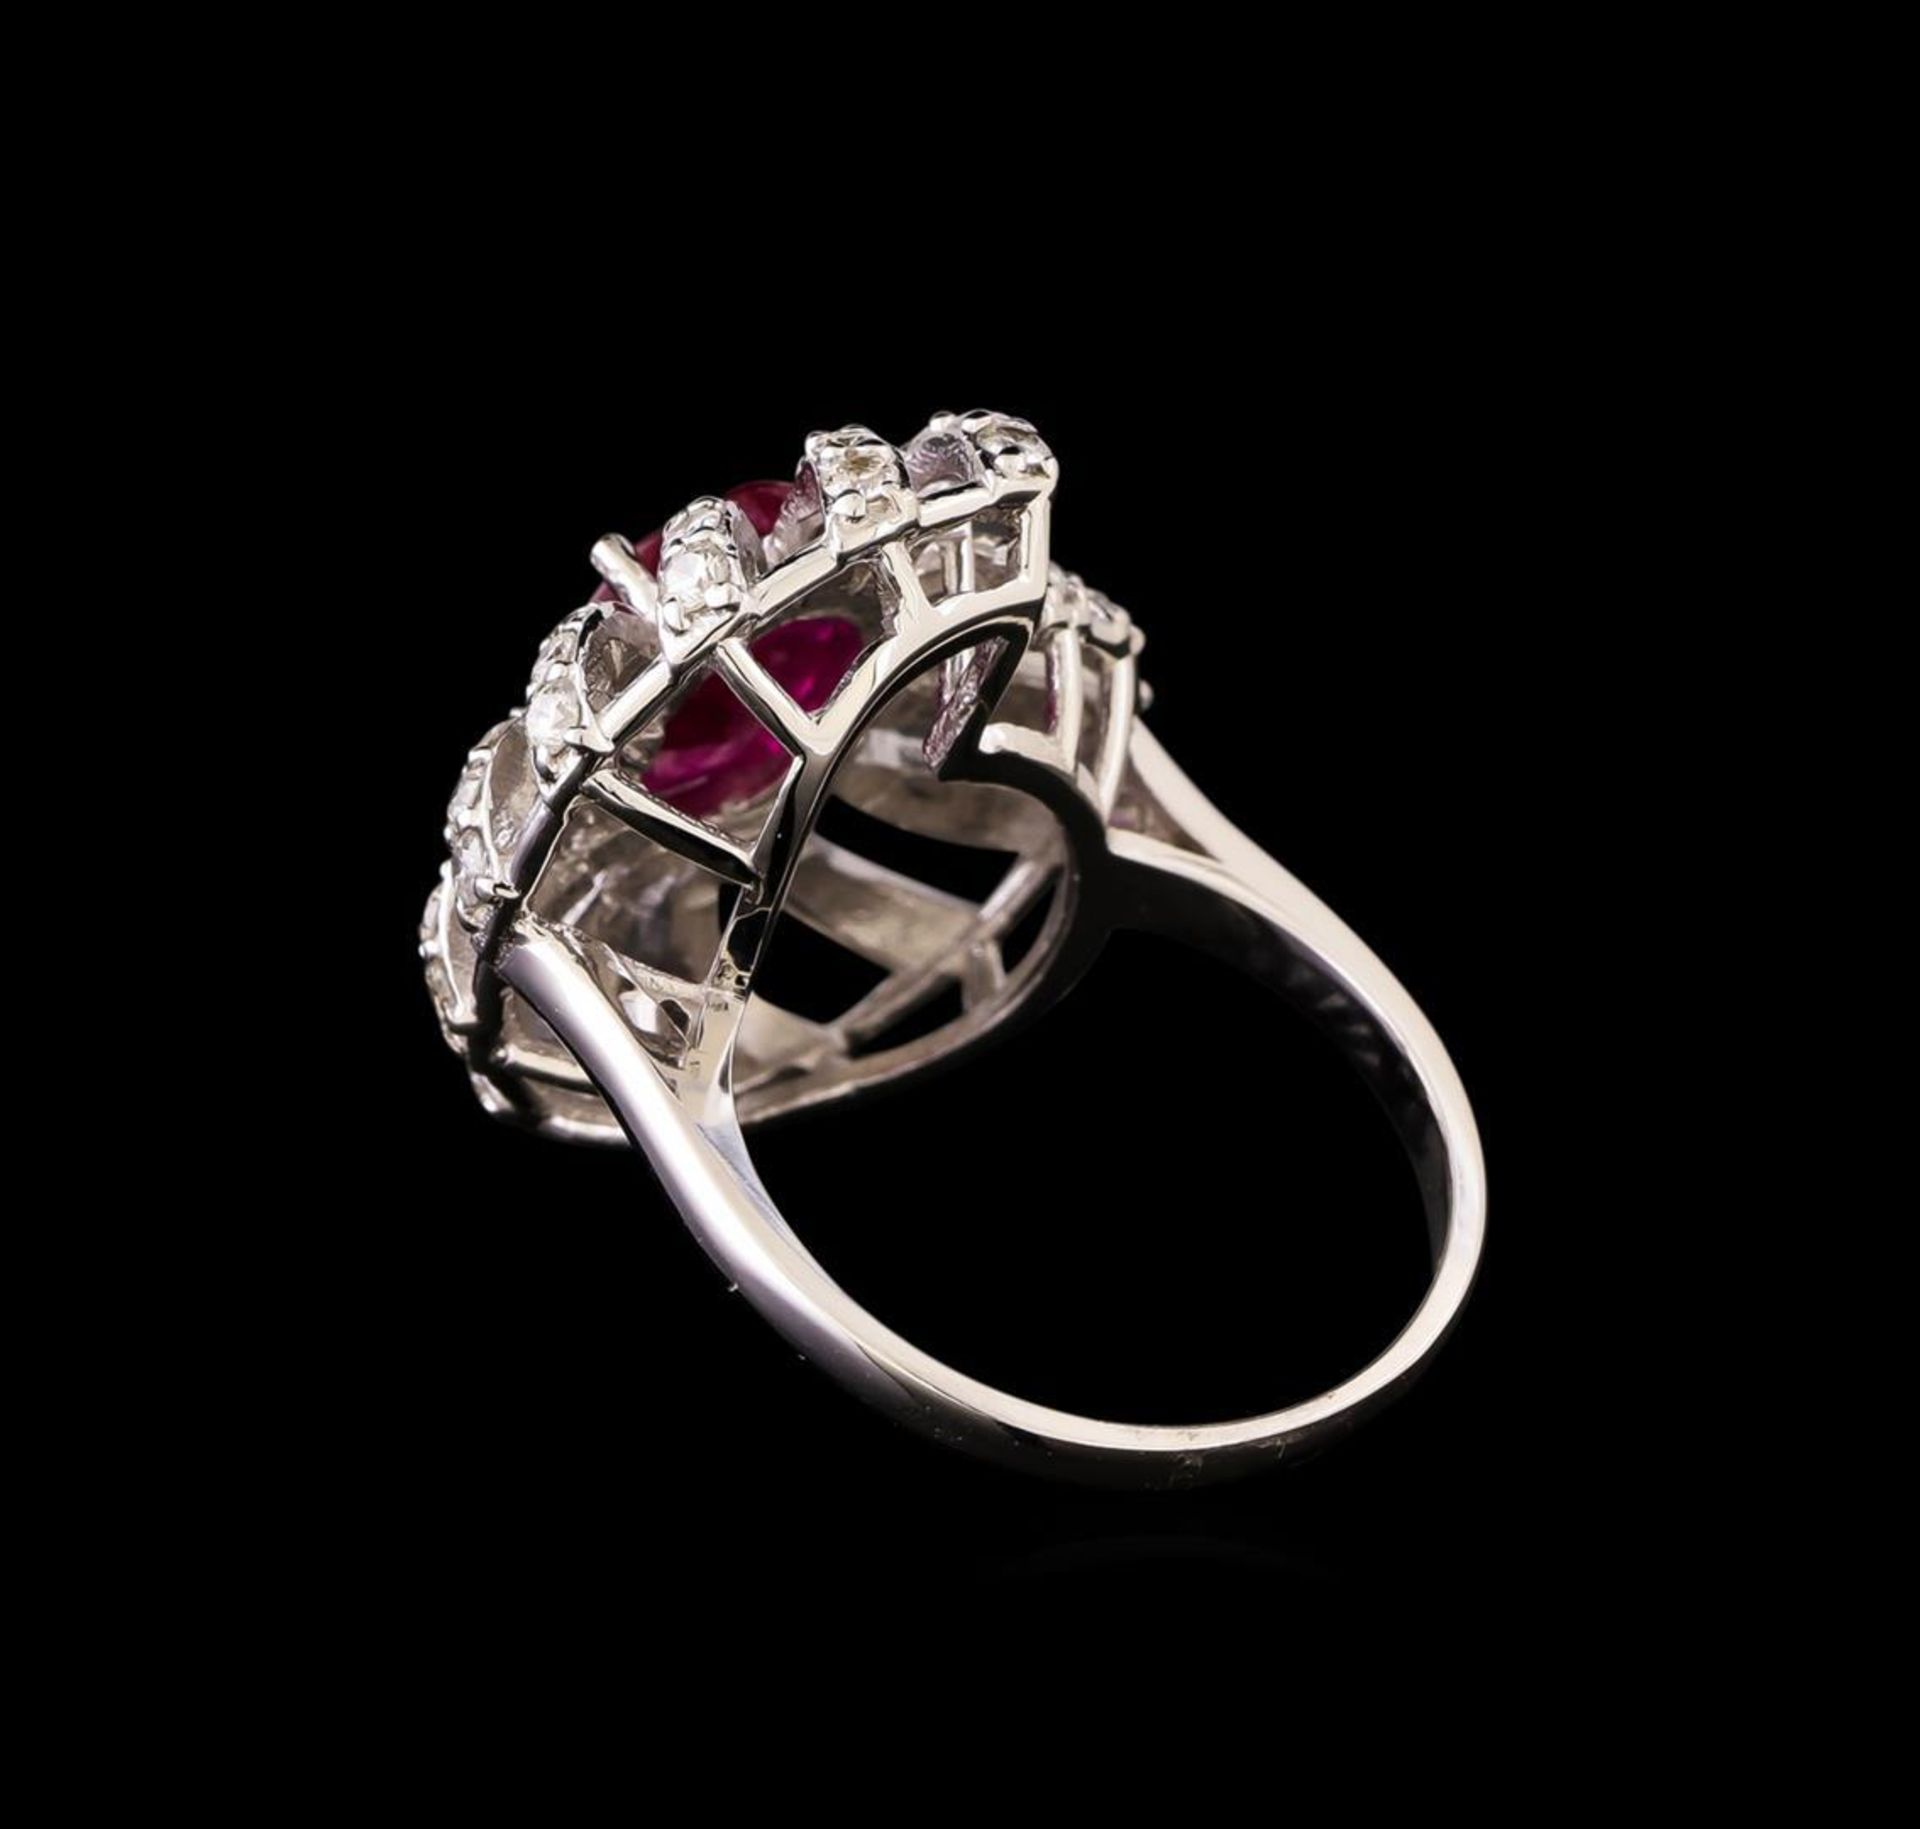 GIA Cert 2.99 ctw Ruby and Diamond Ring - 14KT White Gold - Image 3 of 7